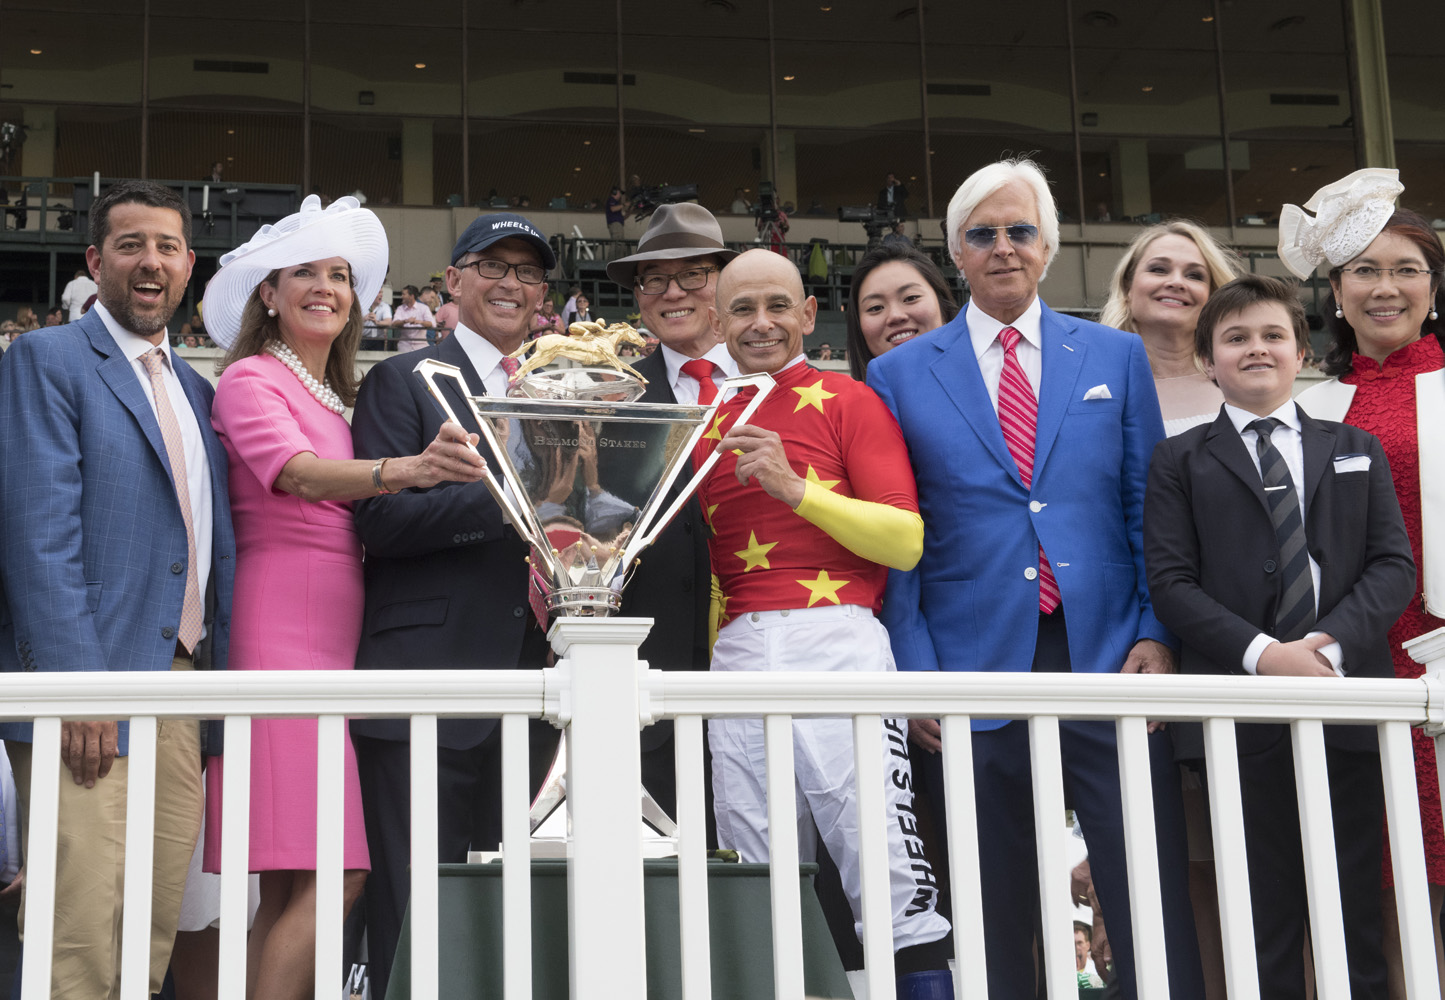 Bob Baffert and the winning connections of Justify during the 2018 Triple Crown trophy presentation (Skip Dickstein)